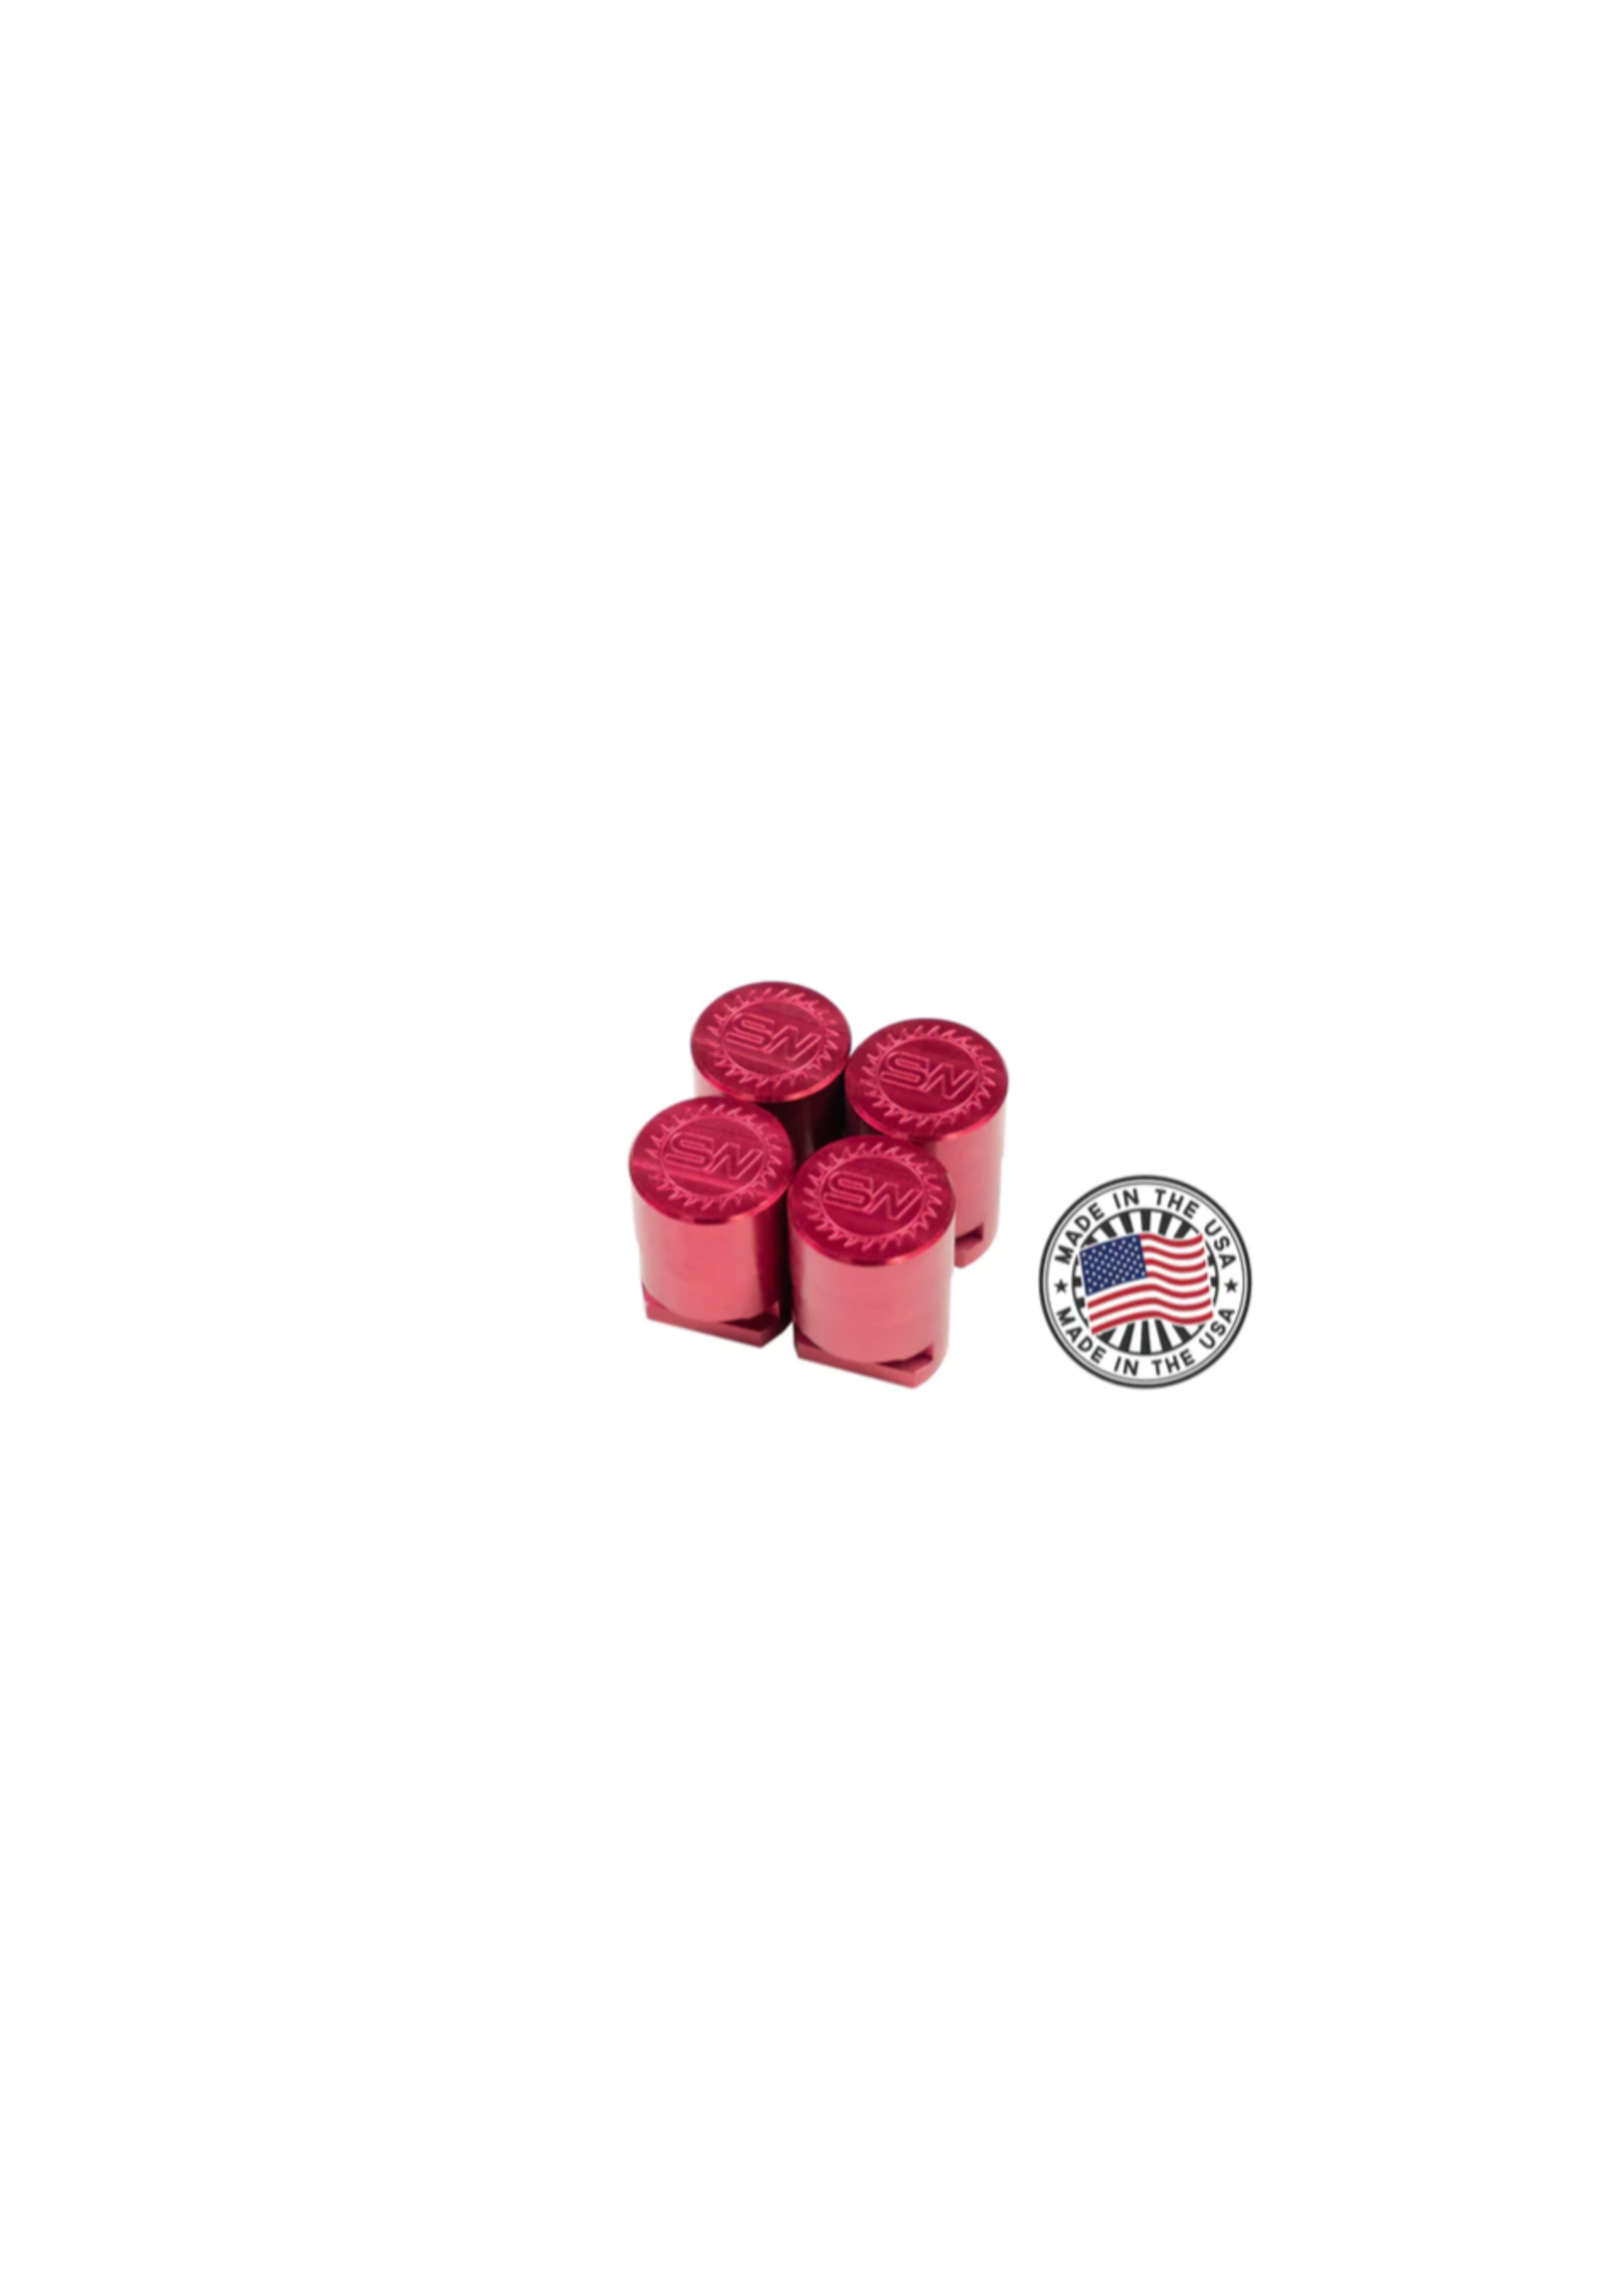 Seneca Stowaway Dog Pack of 4 Red Anodize